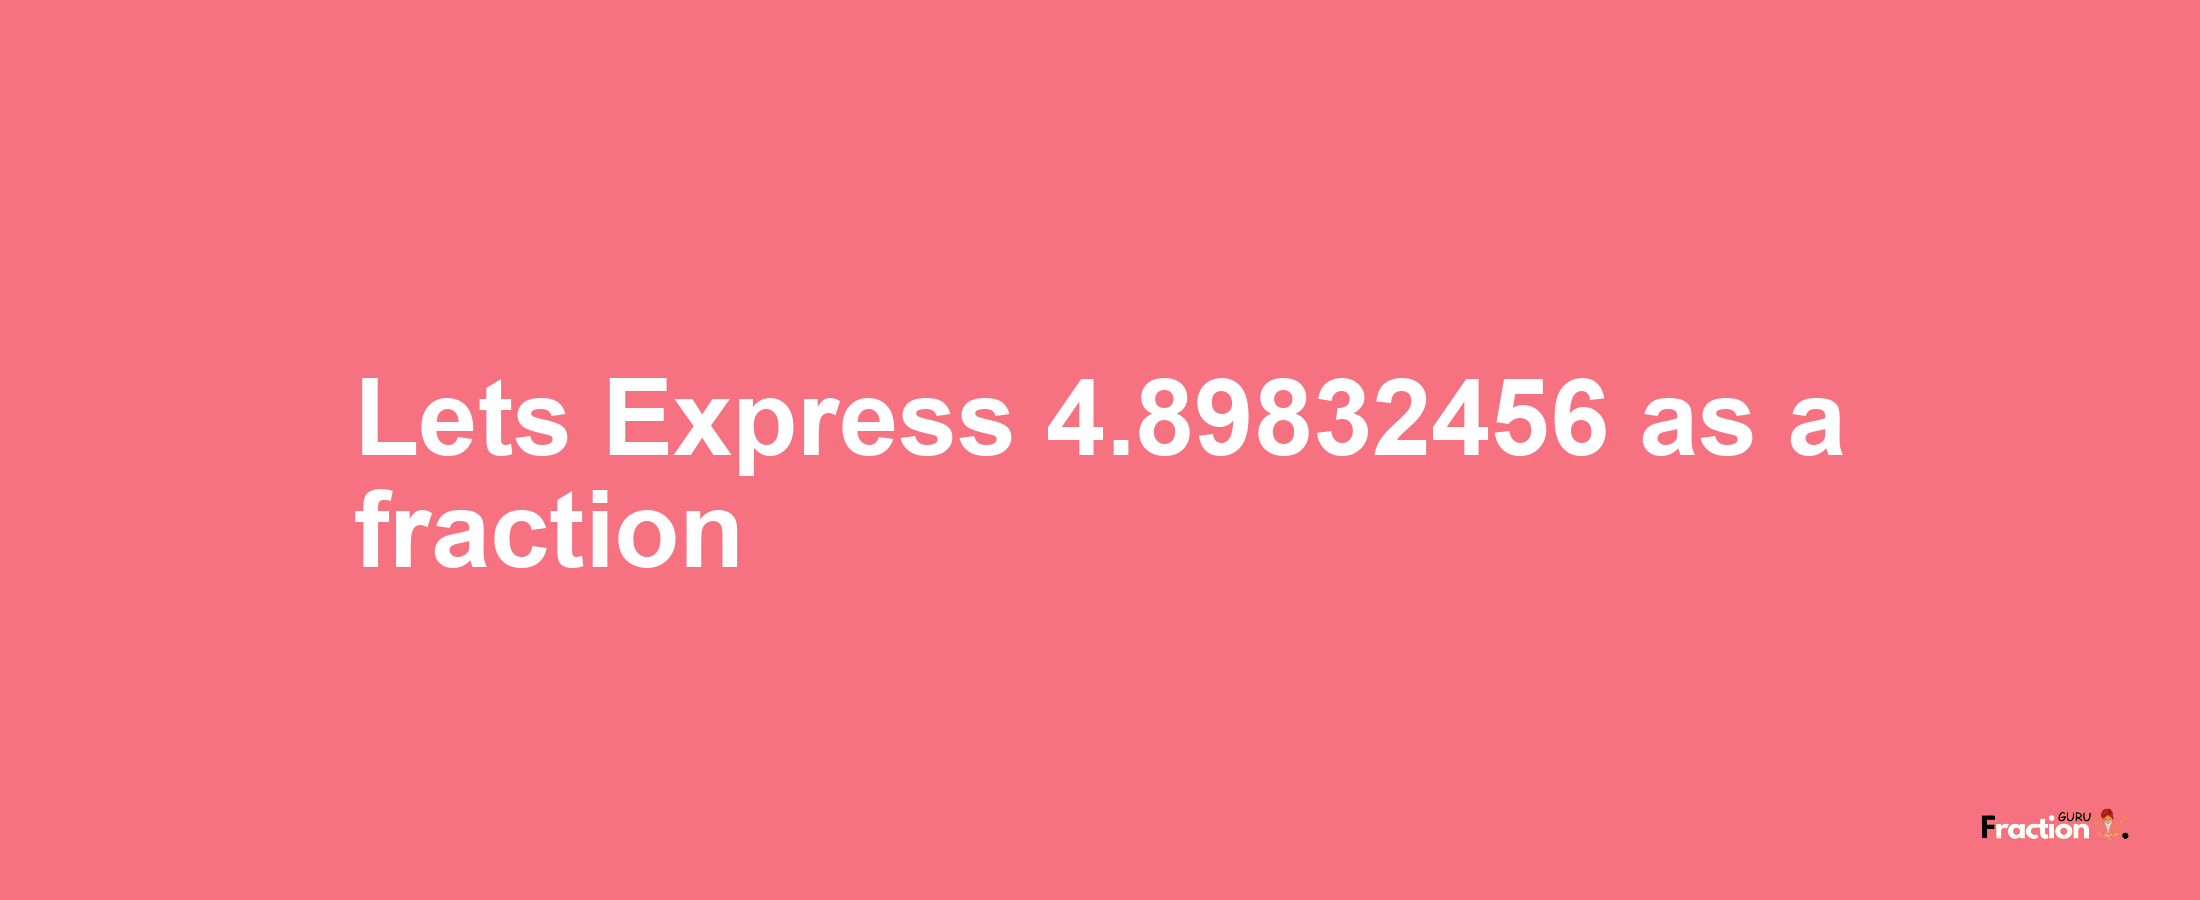 Lets Express 4.89832456 as afraction